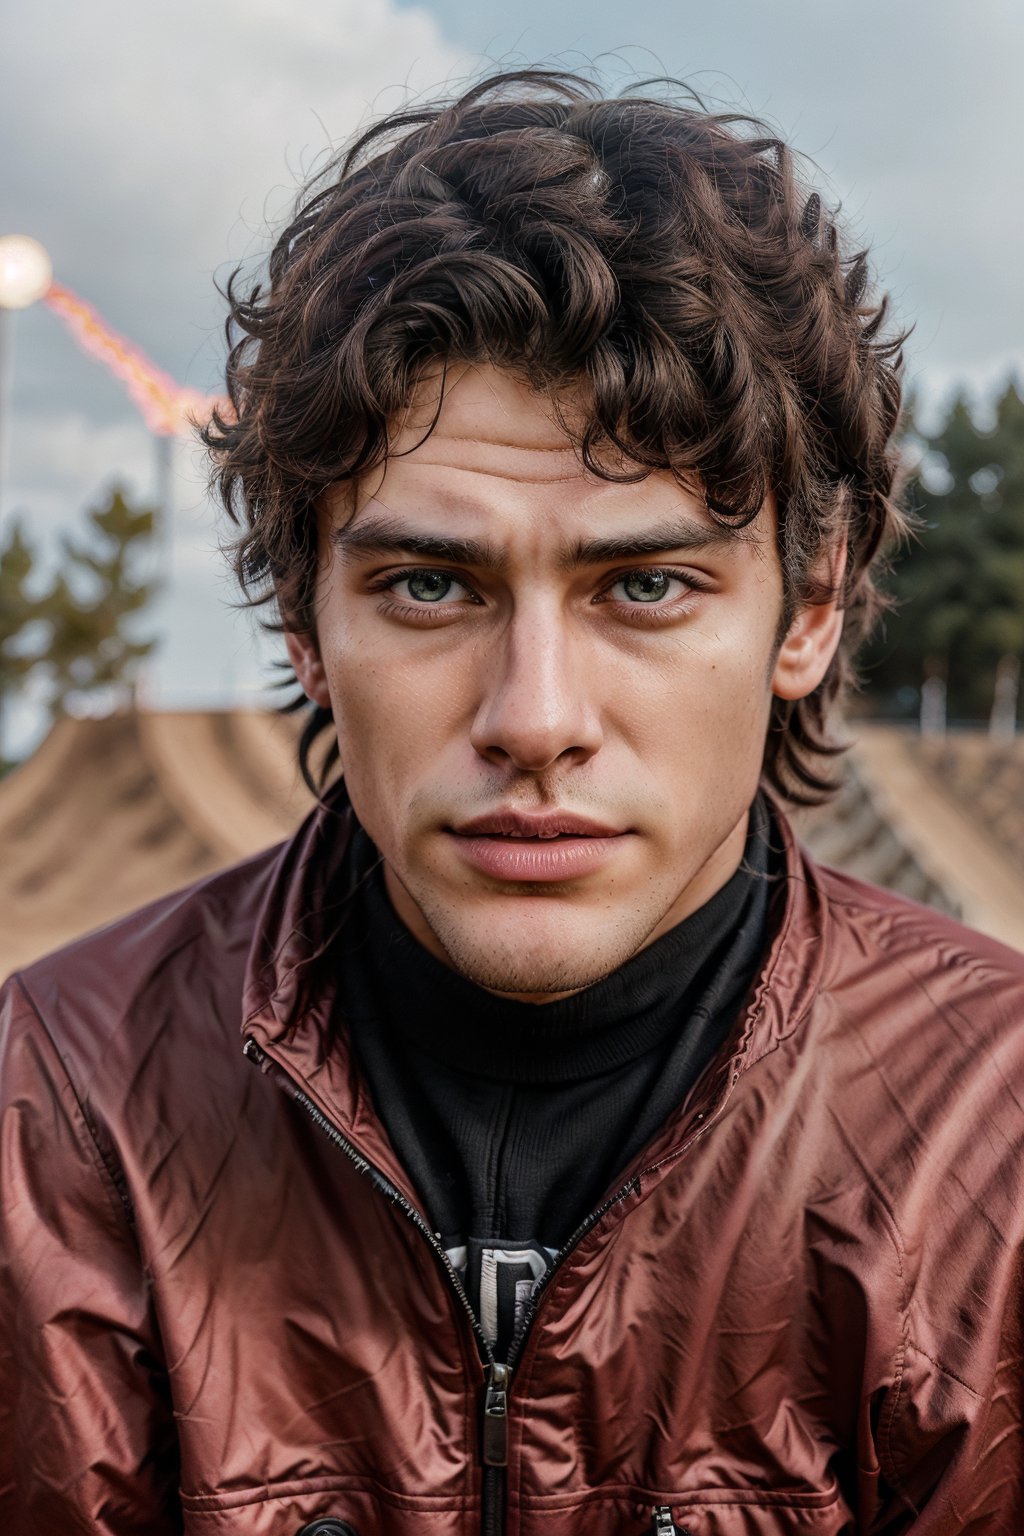 Hyper realistic image of an athletic looking Caucasian man dressed biker Red uniform. ((The uniform red Fox Racing Sports whit Logos: 1.2)). The character should have detailed skin texture, well-defined hands, and hazel eyes that reflect realism. His face should show symmetry in his physical features, and he should have a serious but friendly expression. When standing, the lighting in the scene should be natural and realistic, with a medium shot that shows the character centered in the frame, (looking directly at the viewer: 1.2). ((Also, make sure his entire body is facing the viewer to create a sense of connection: 1.6)).
(Change biker uniform color: 1.8)
(Fund of a BMX track: 1.6)